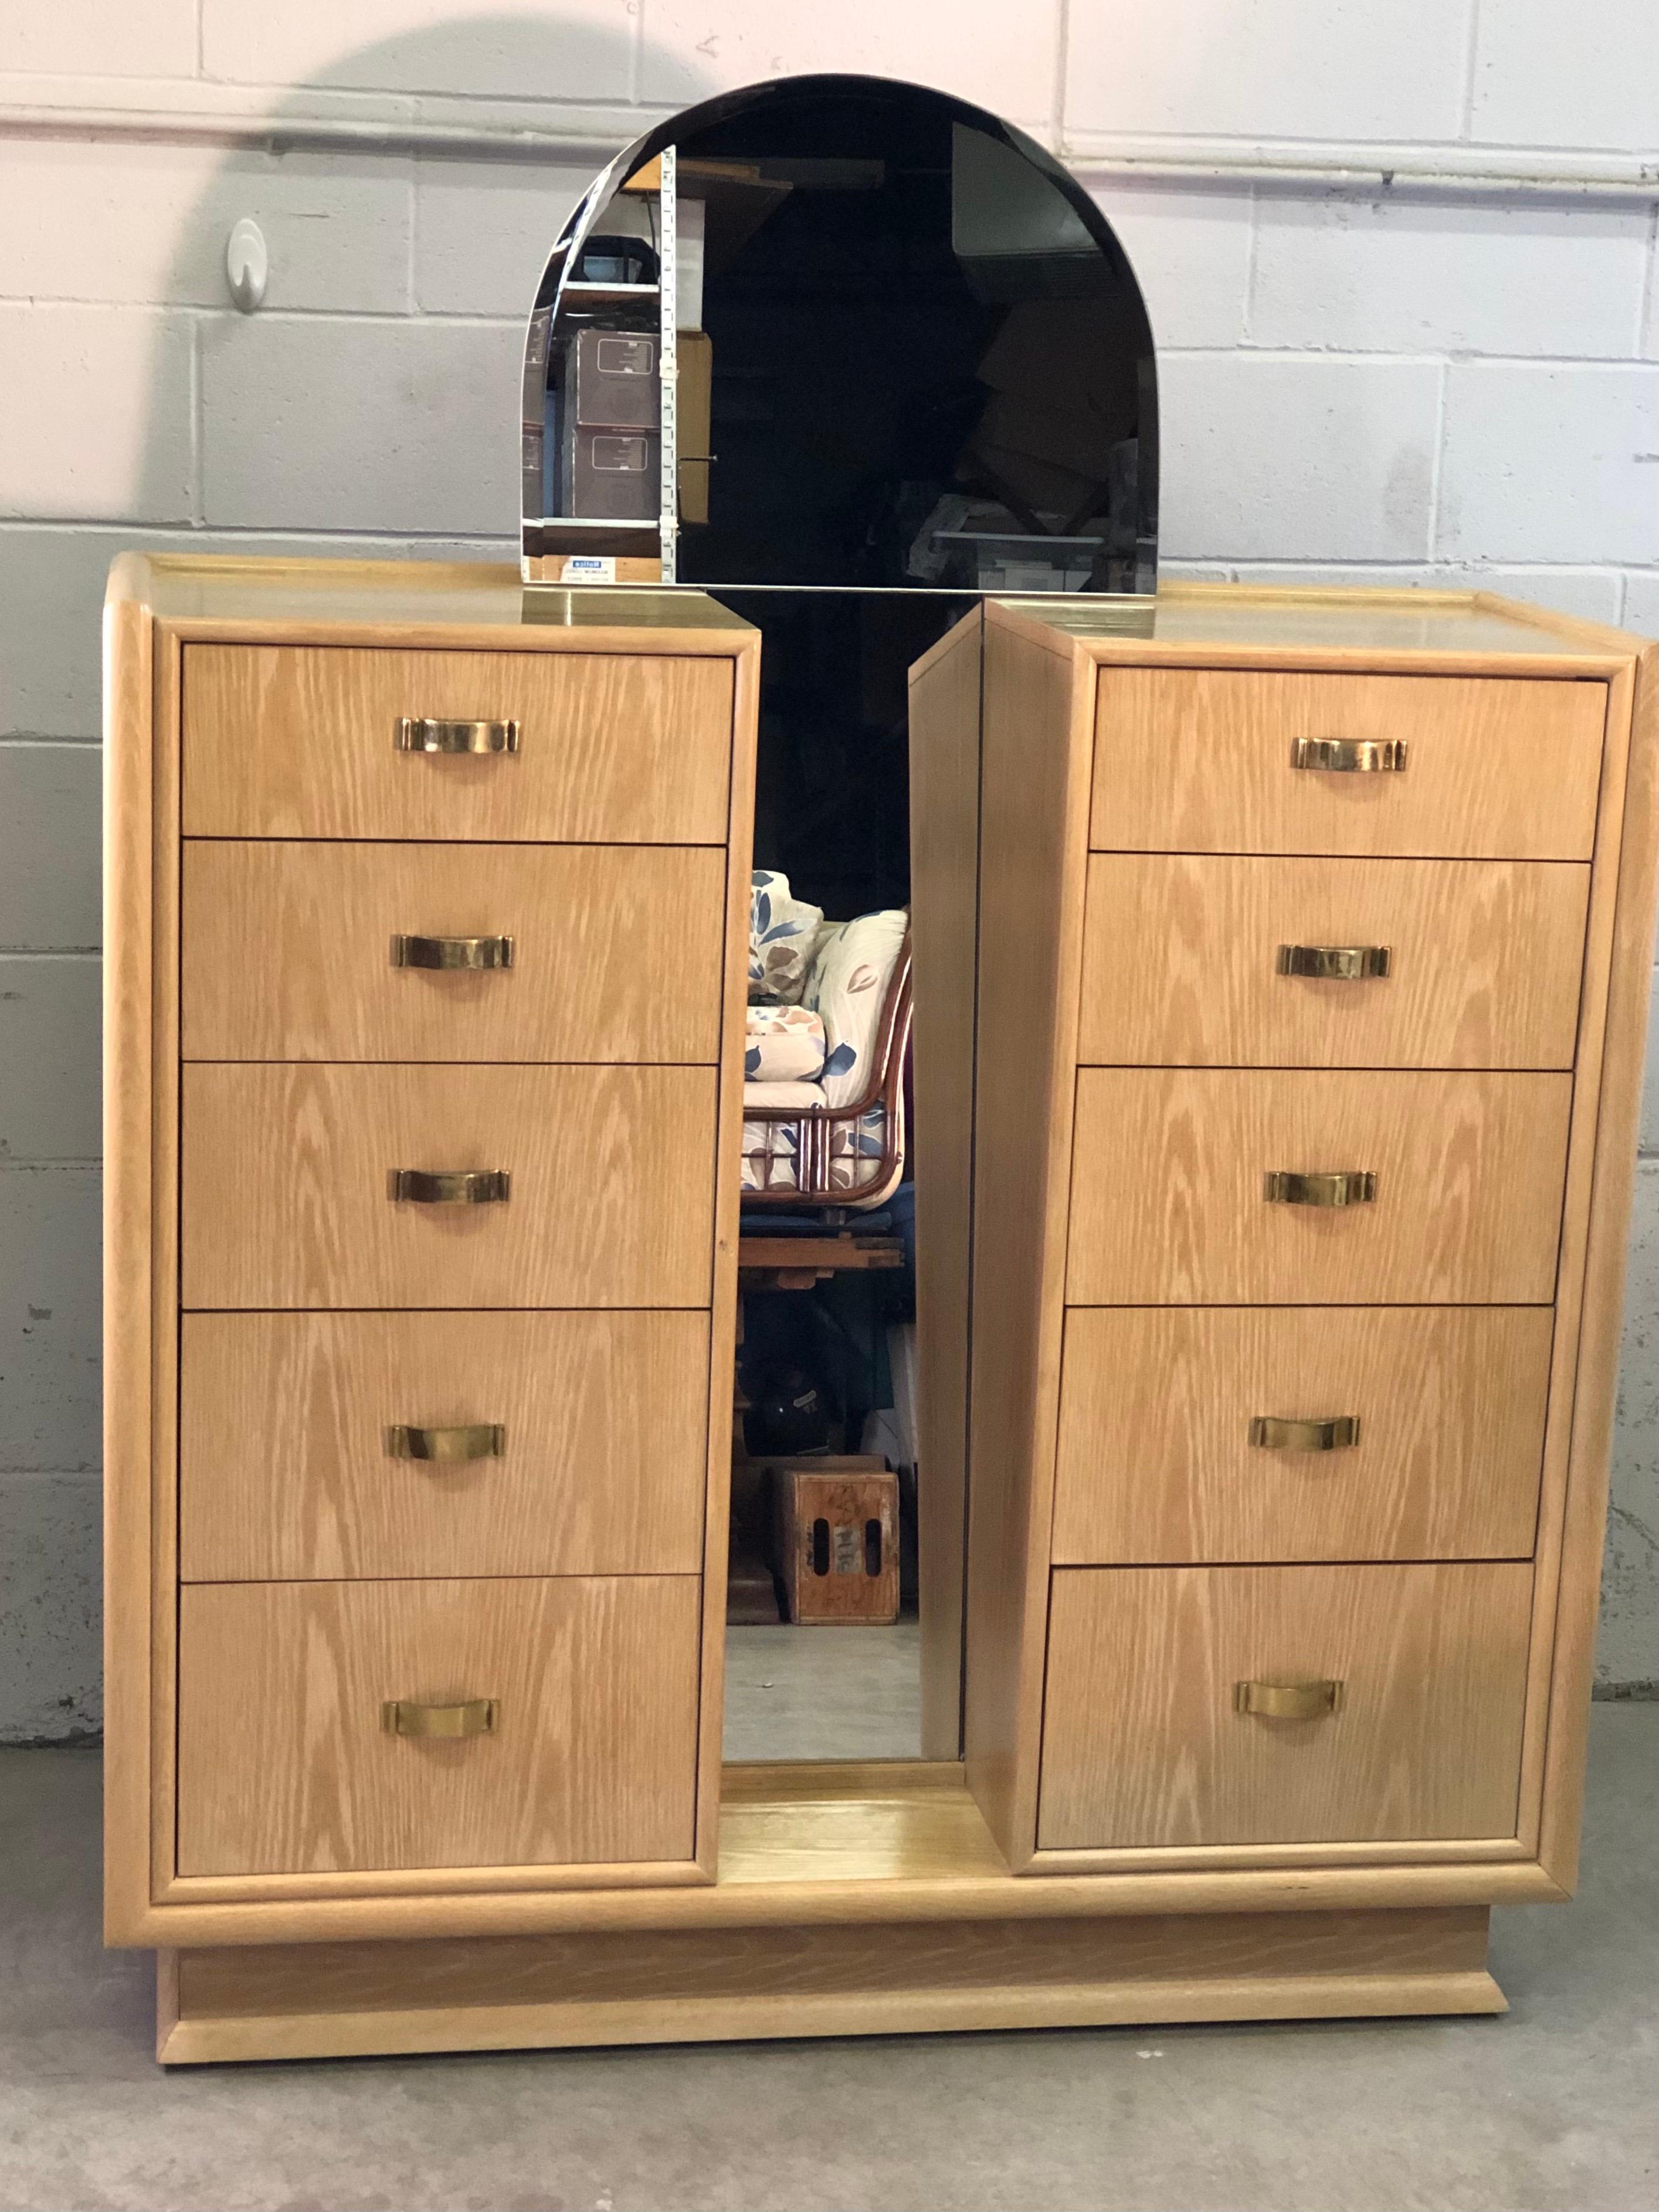 Vintage 1980s white washed oak dresser with mirror by Century Furniture. The dresser has 10 drawers for storage. The drawers measure from 3.5 - 9” high. The pulls are solid brass. The dresser is 48”H without the mirror. Marked inside the drawer.